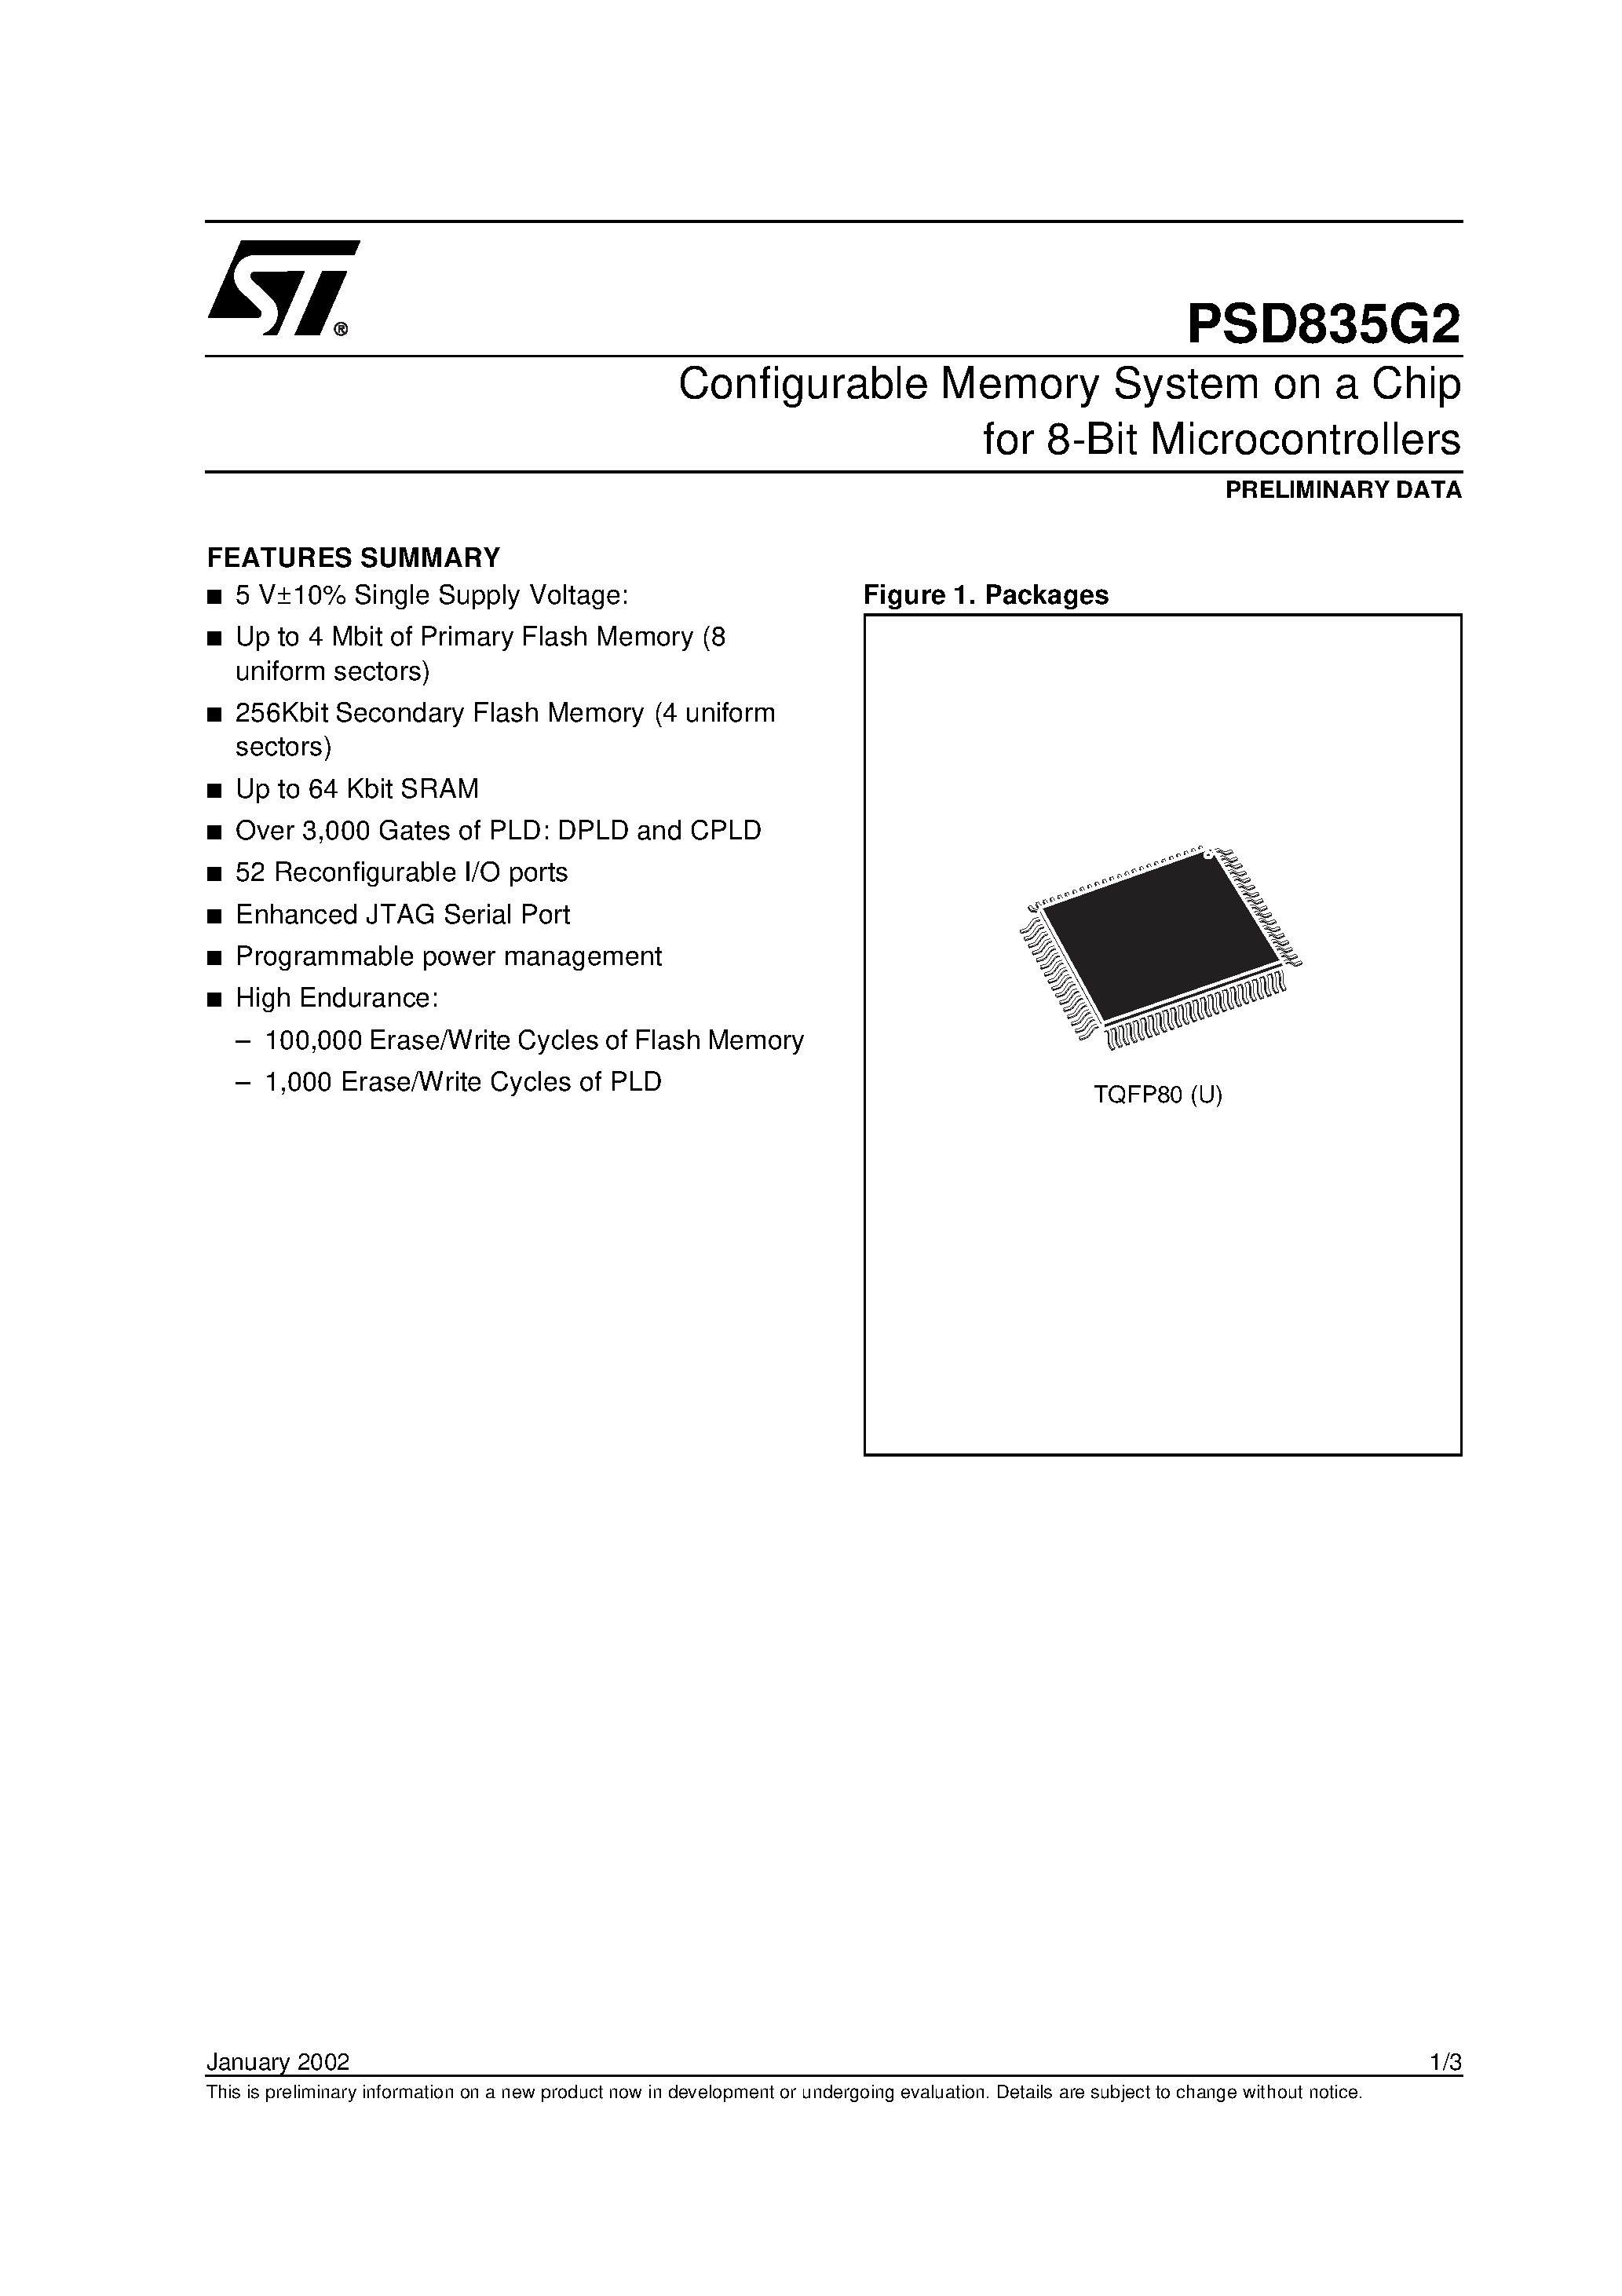 Datasheet PSD835F2V-A-90J - Configurable Memory System on a Chip for 8-Bit Microcontrollers page 1